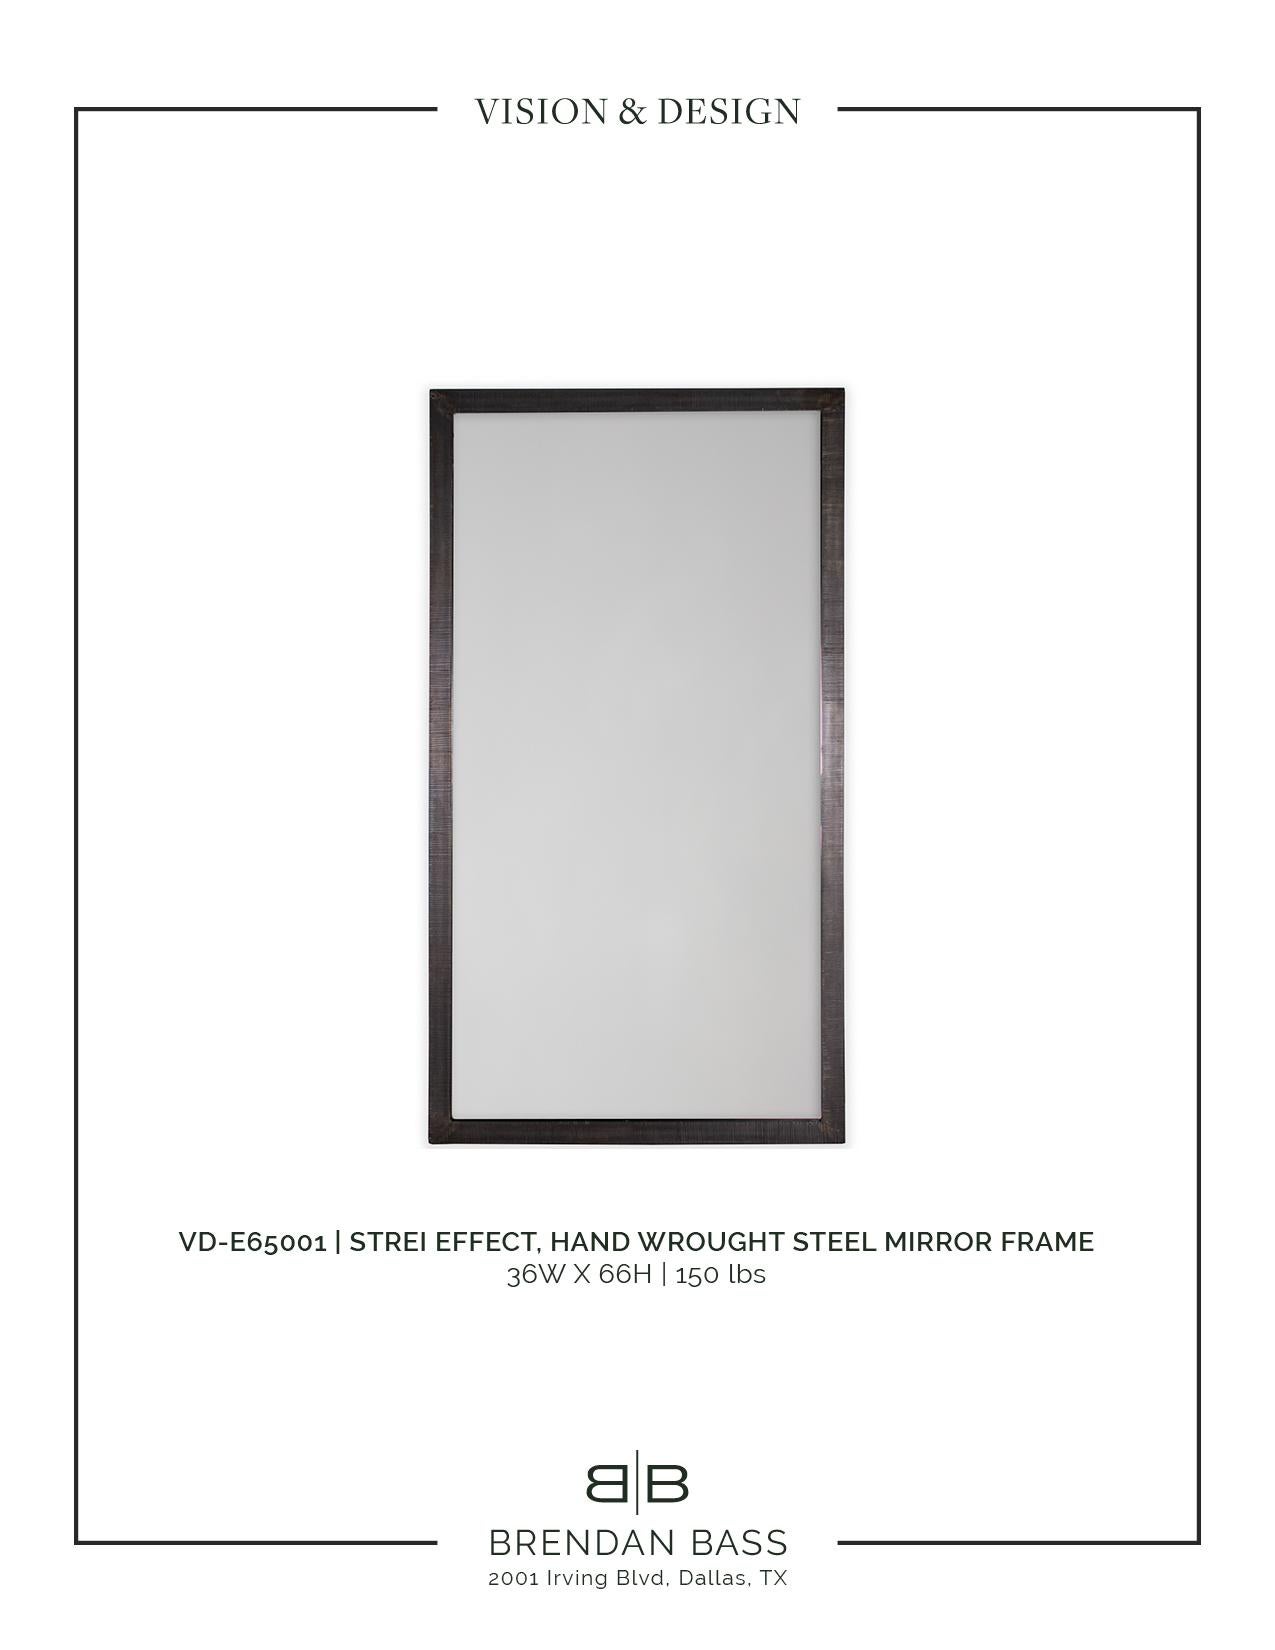 Contemporary Strei Effect Hand Wrought Steel Mirror Frame For Sale